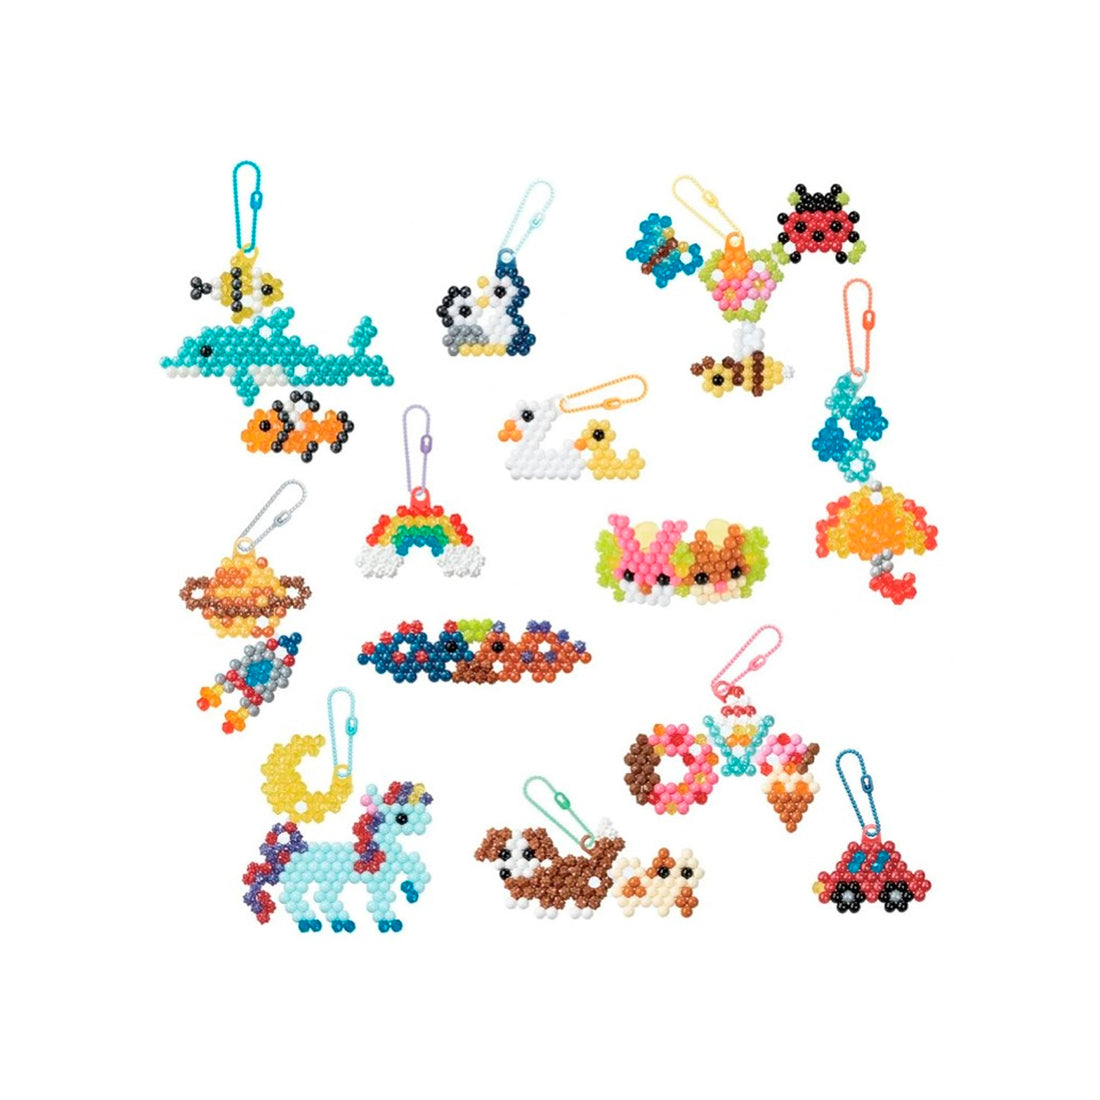 Aquabeads - Keychain Party Pack